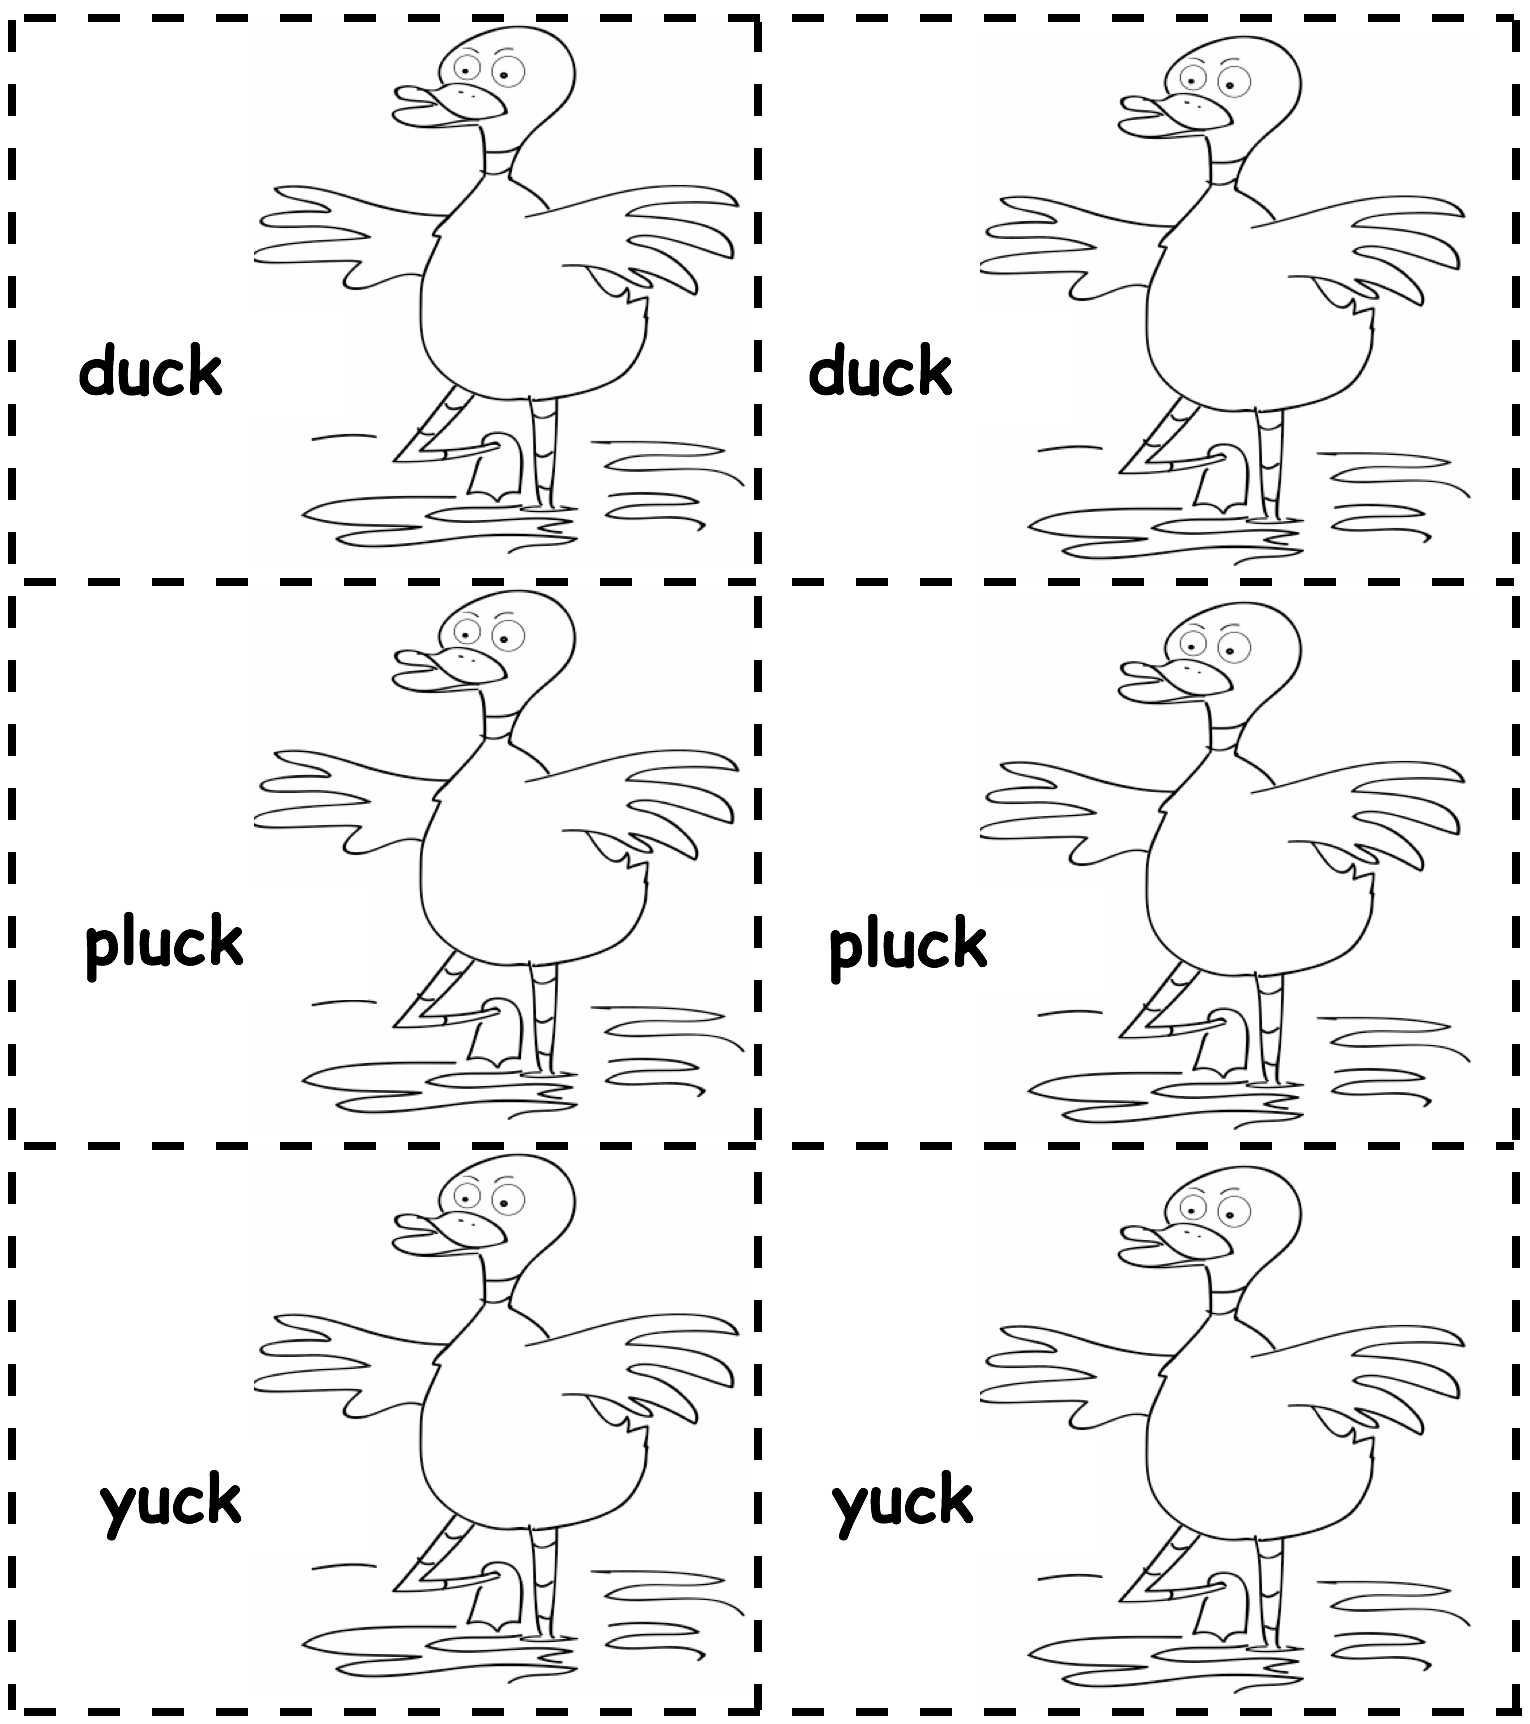 lucky-duck-game-cards-2